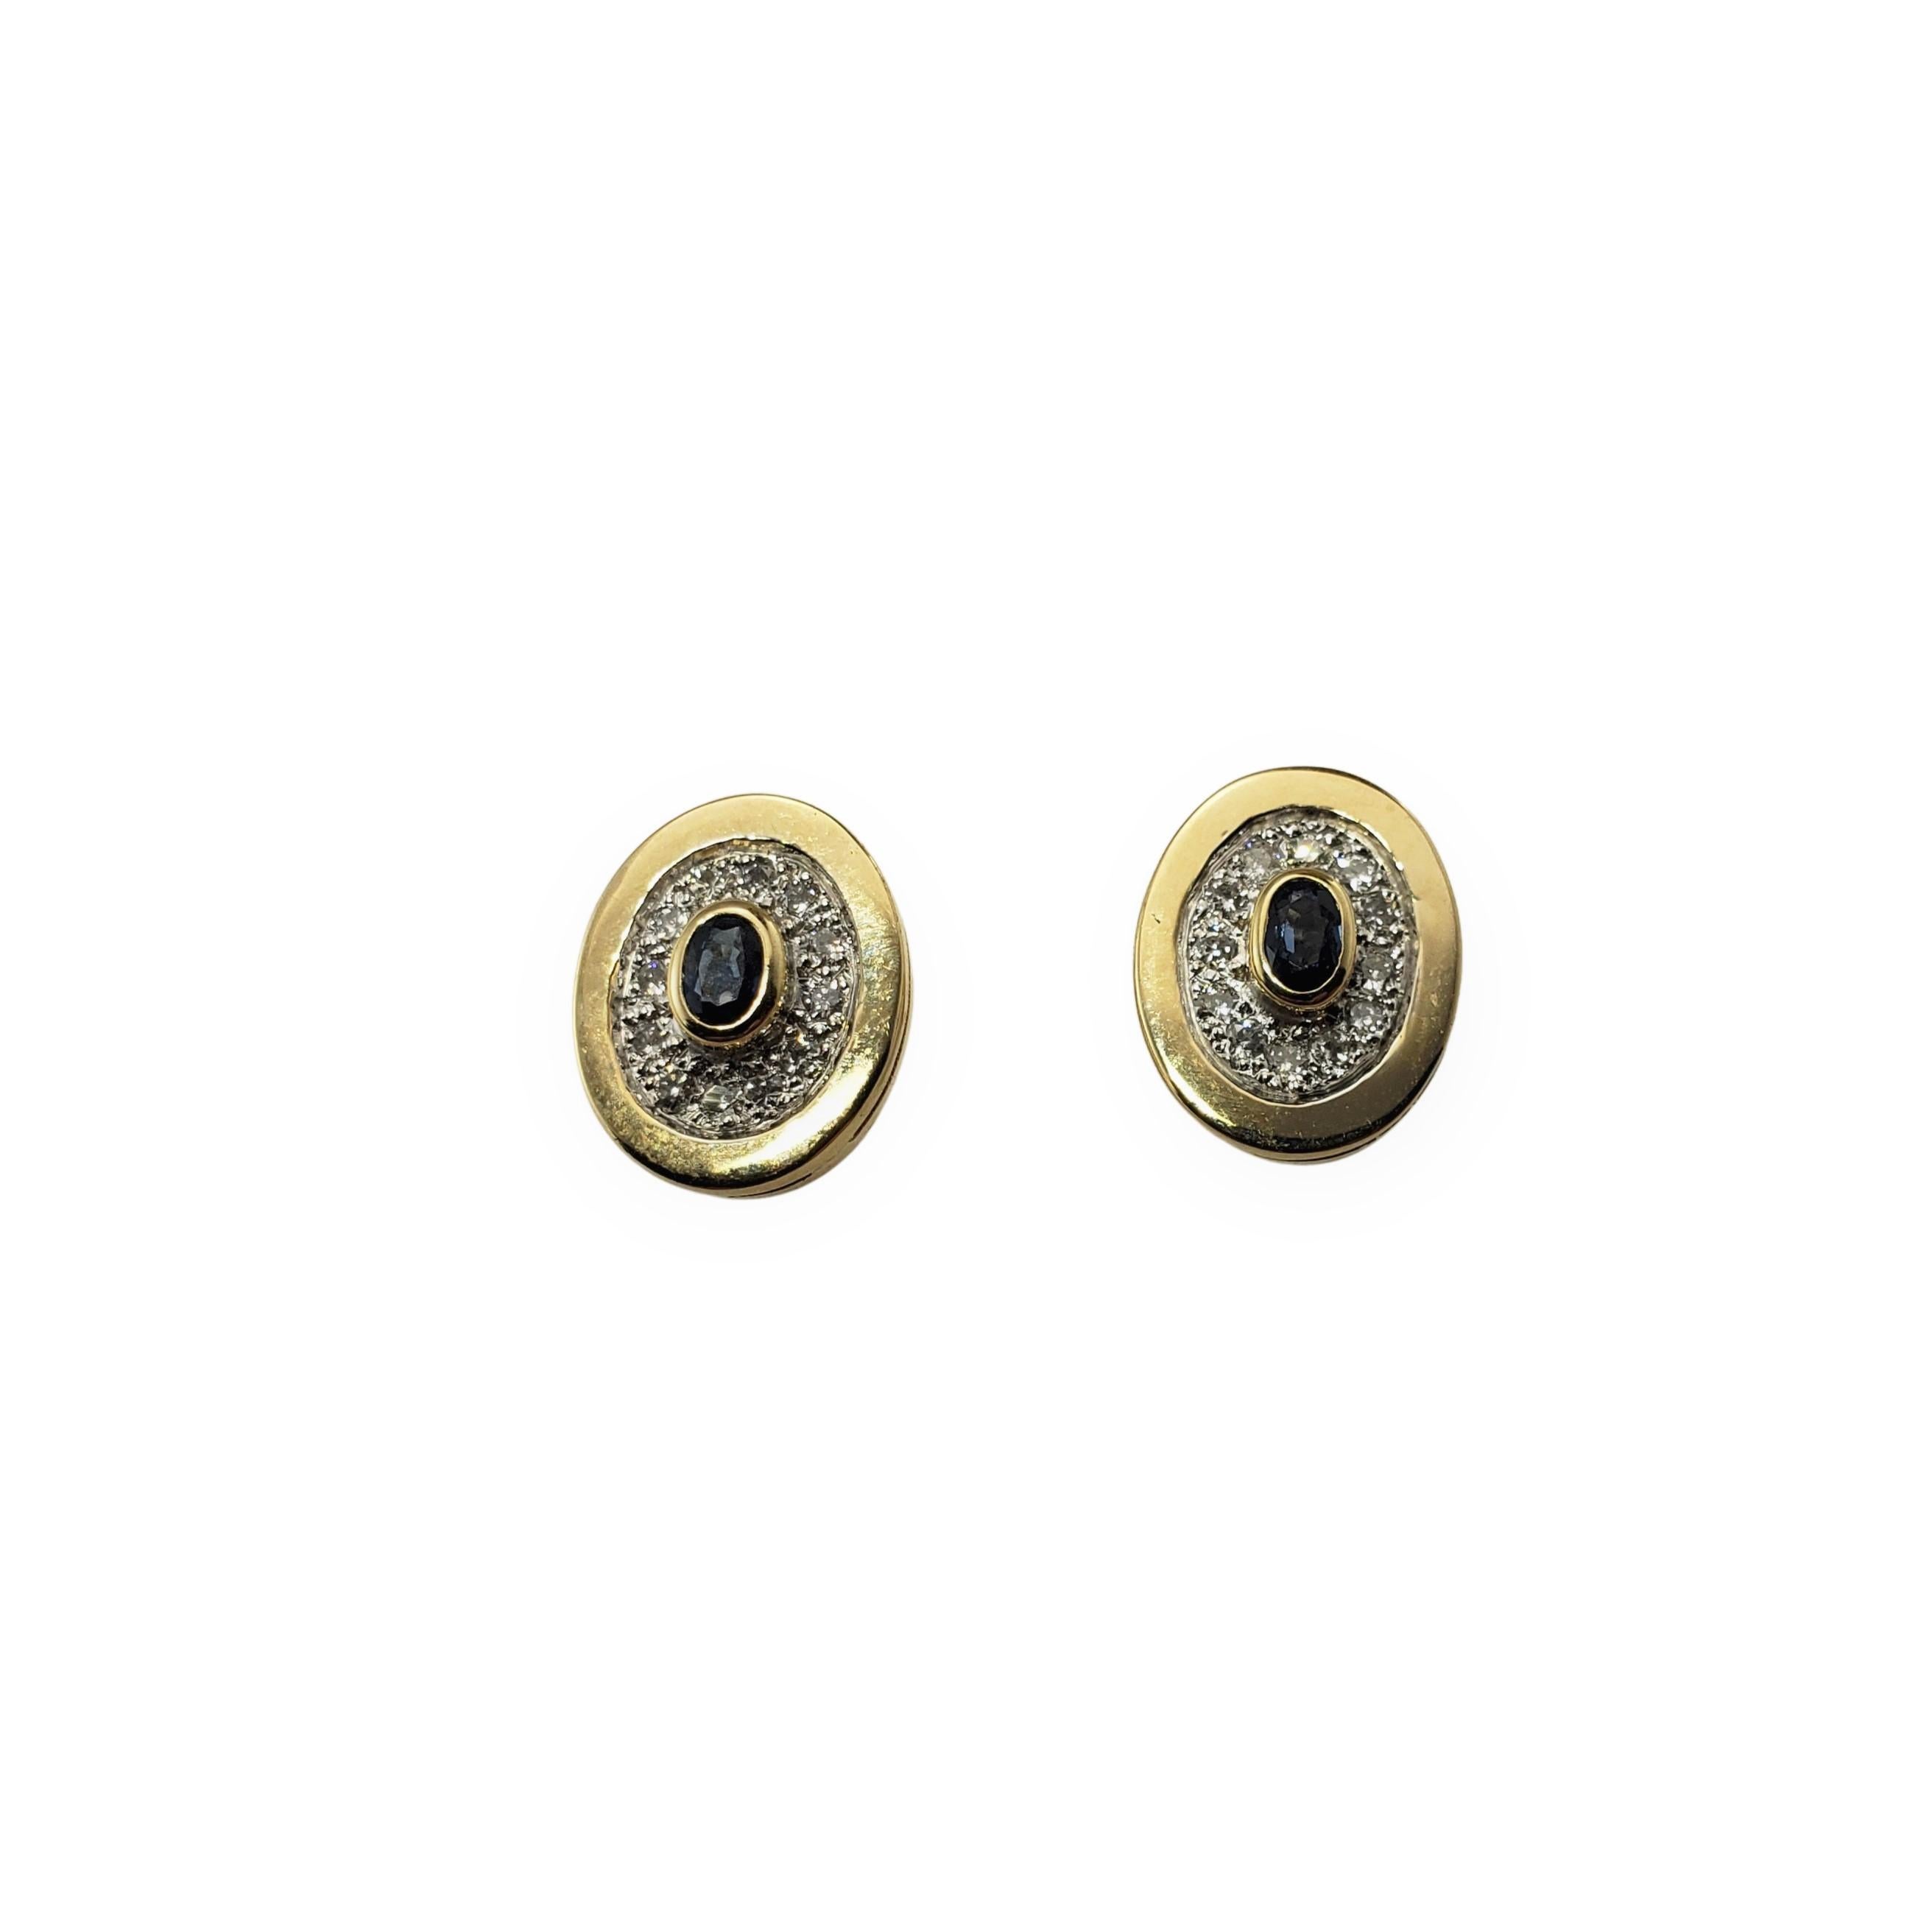 Vintage 14 Karat Yellow Gold Sapphire and Diamond Earrings-

These elegant earrings each feature one oval sapphire (4 mm x 3 mm) and 12 round brilliant cut diamonds set in 14K yellow gold.  Push back closures.

Approximate total diamond weight:  